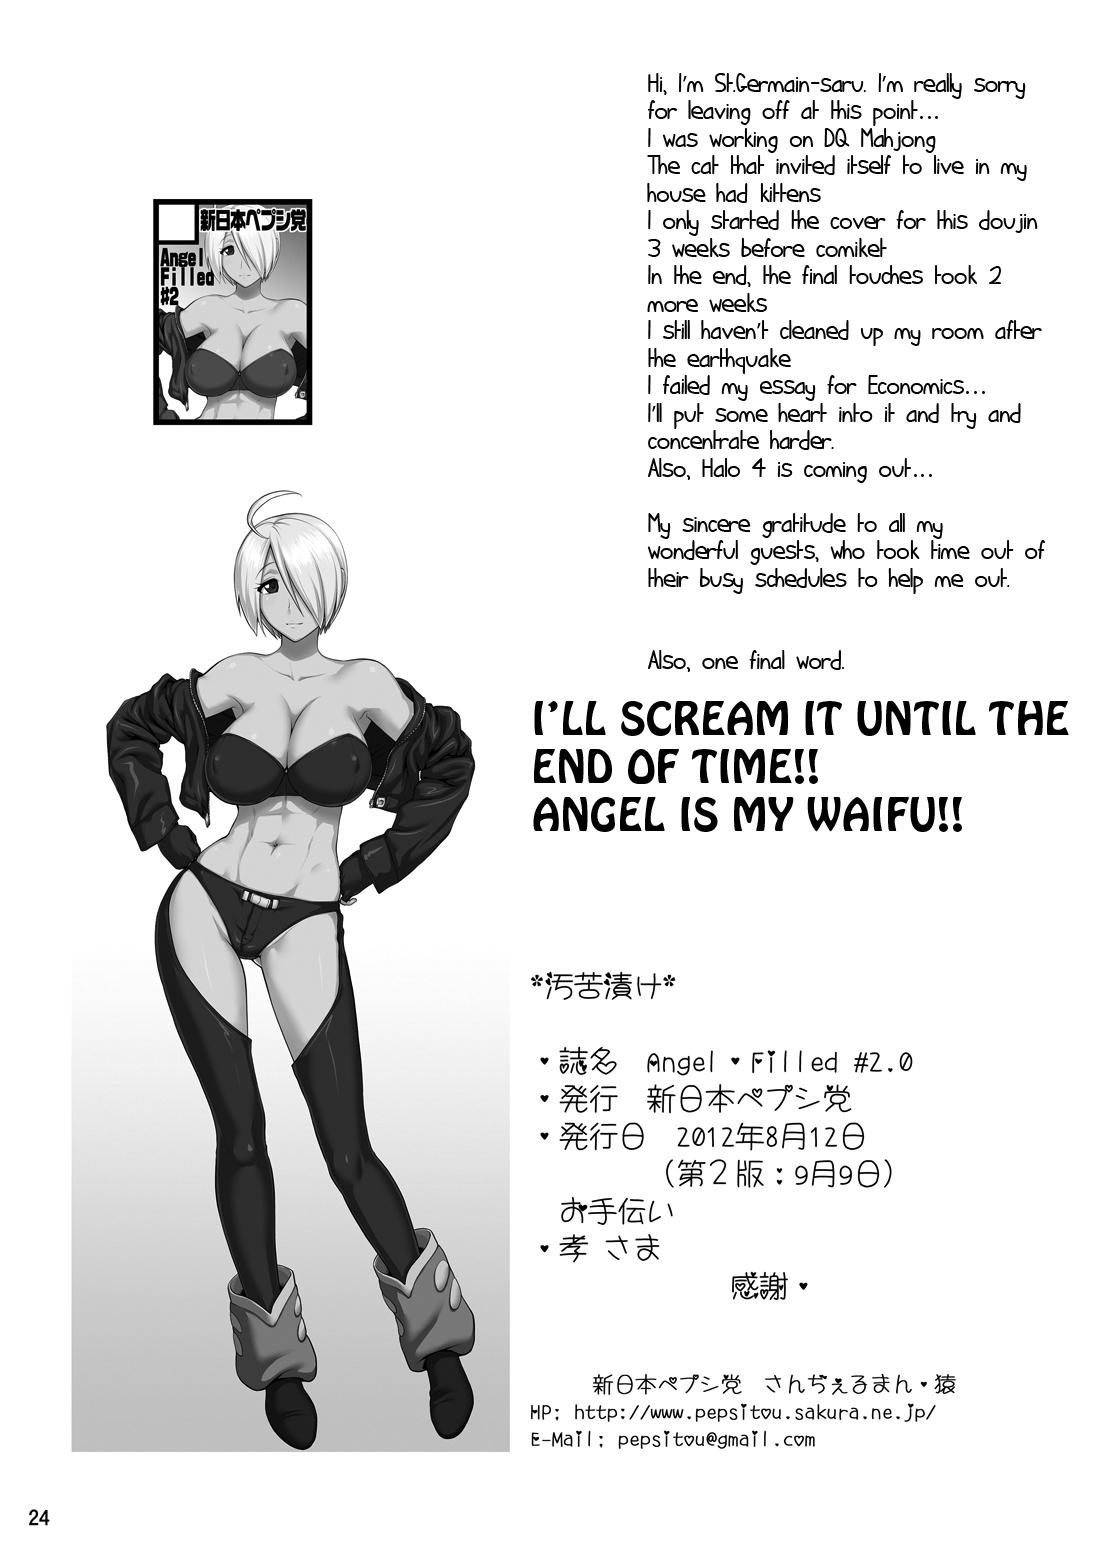 Soapy Angel Filled #2.0 - King of fighters Namorada - Page 25